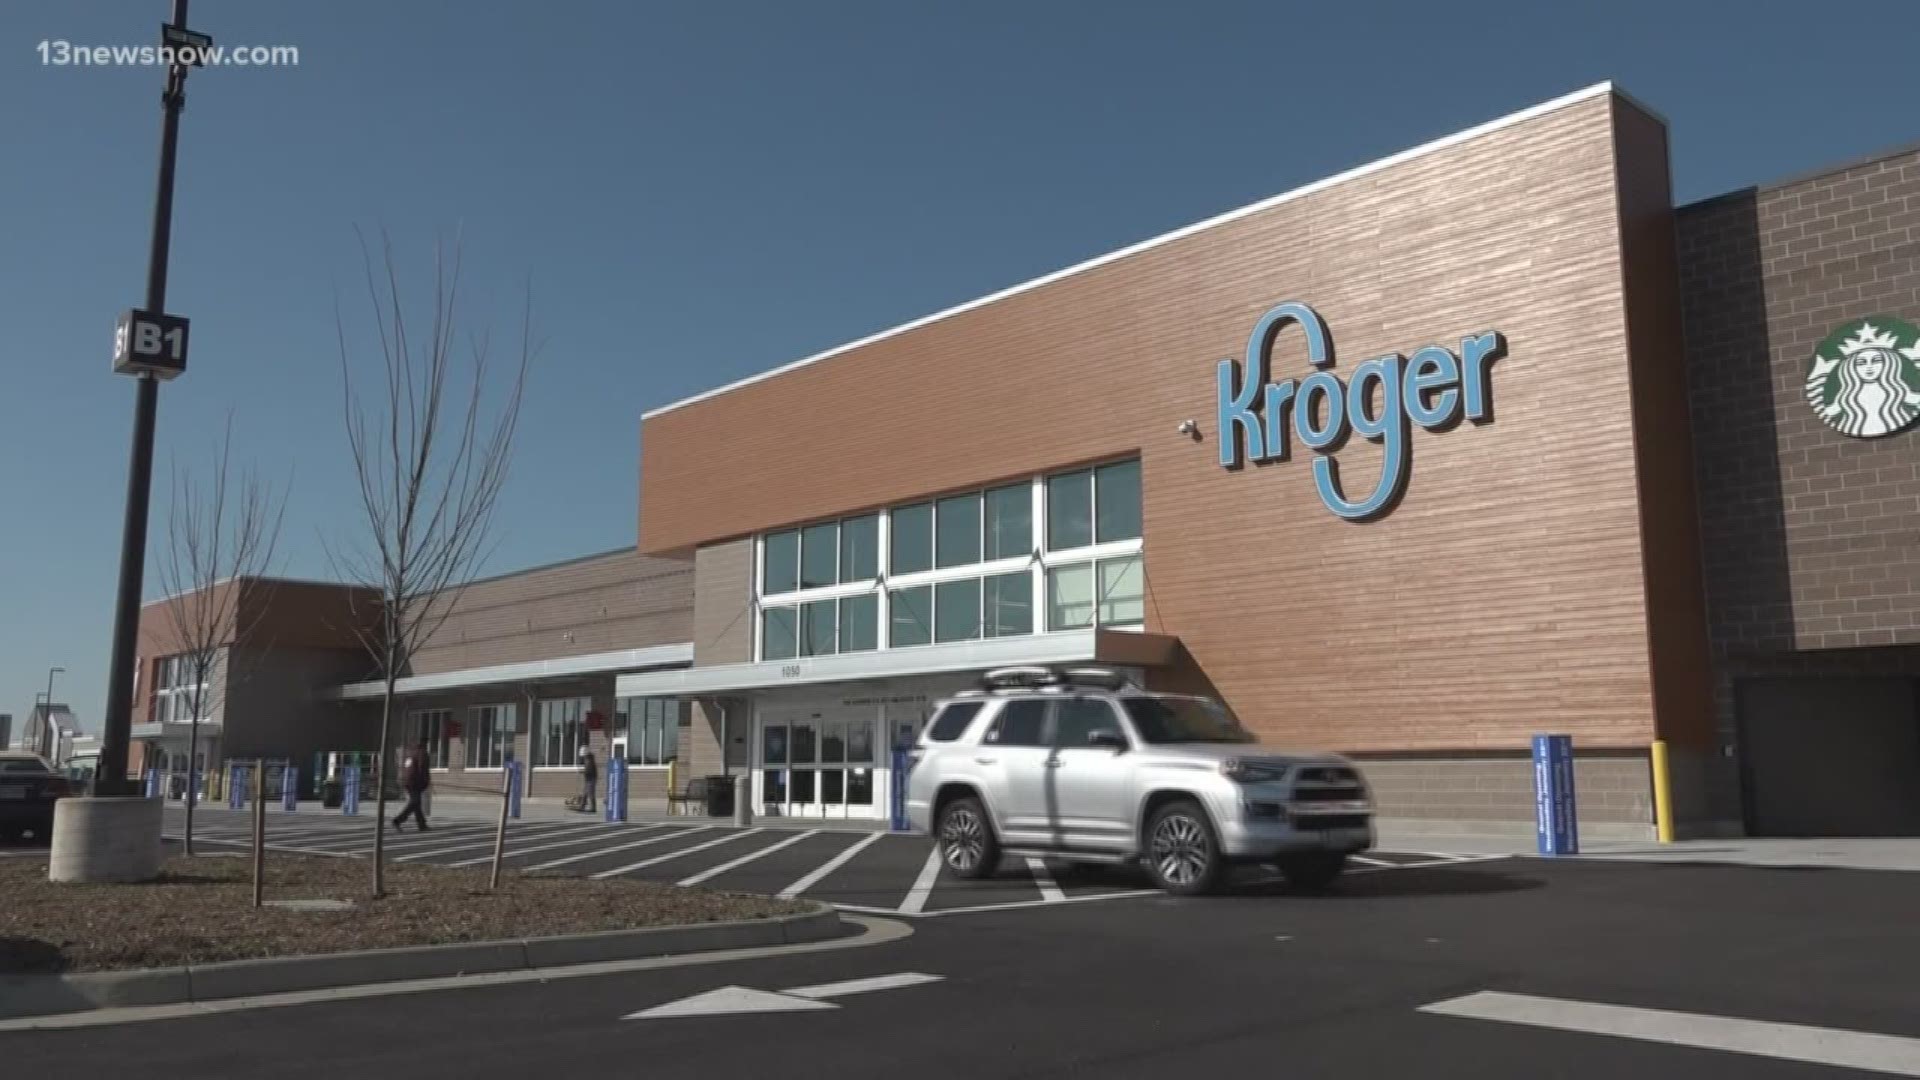 The brand new Kroger in Hampton is set to open and staffers will hand out some special prizes for the first customers in line at its grand opening ceremony.